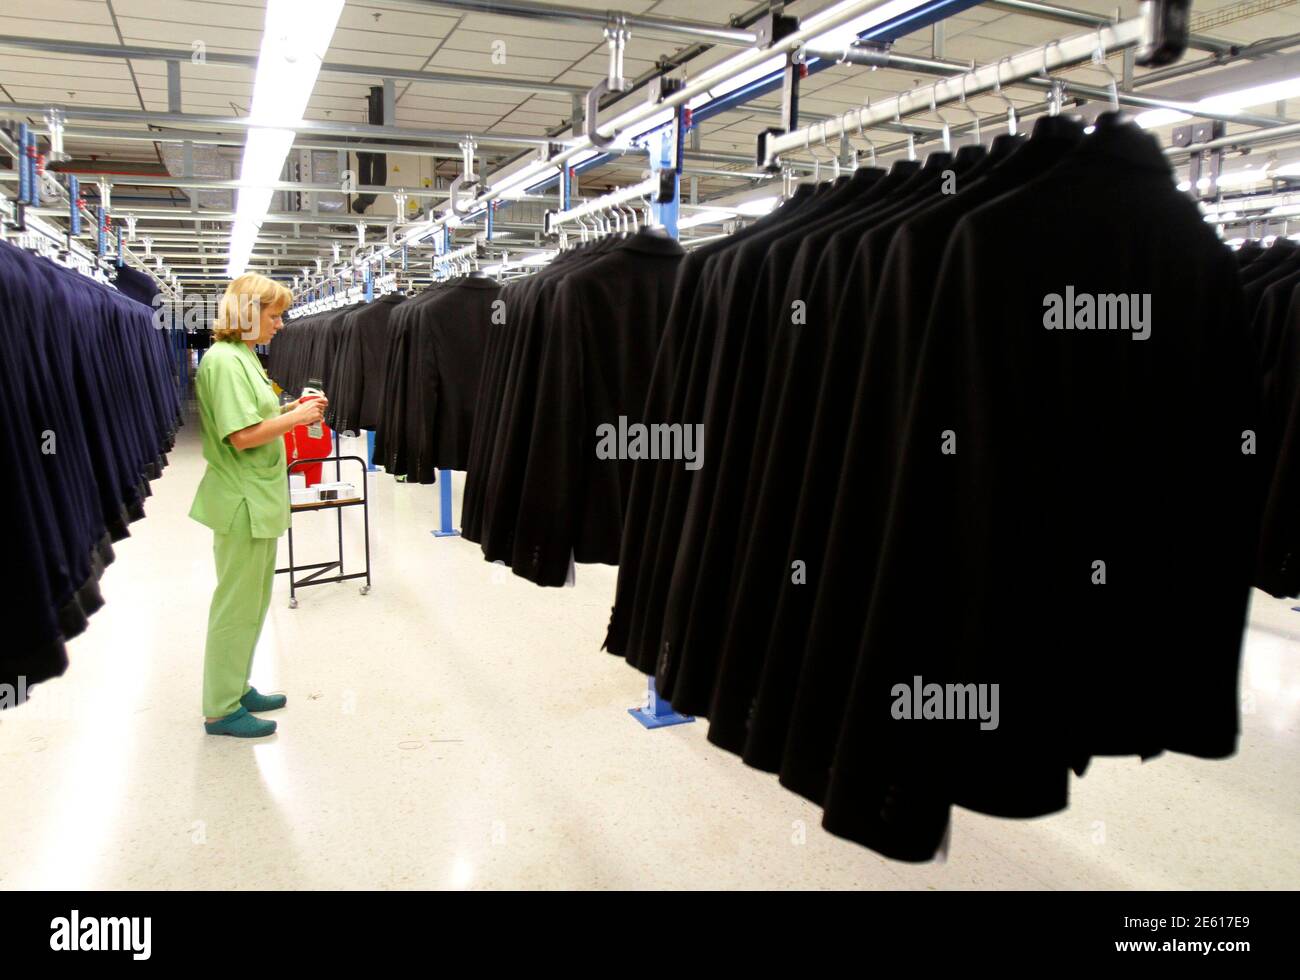 Arteixo Zara Factory High Resolution Stock Photography and Images - Alamy